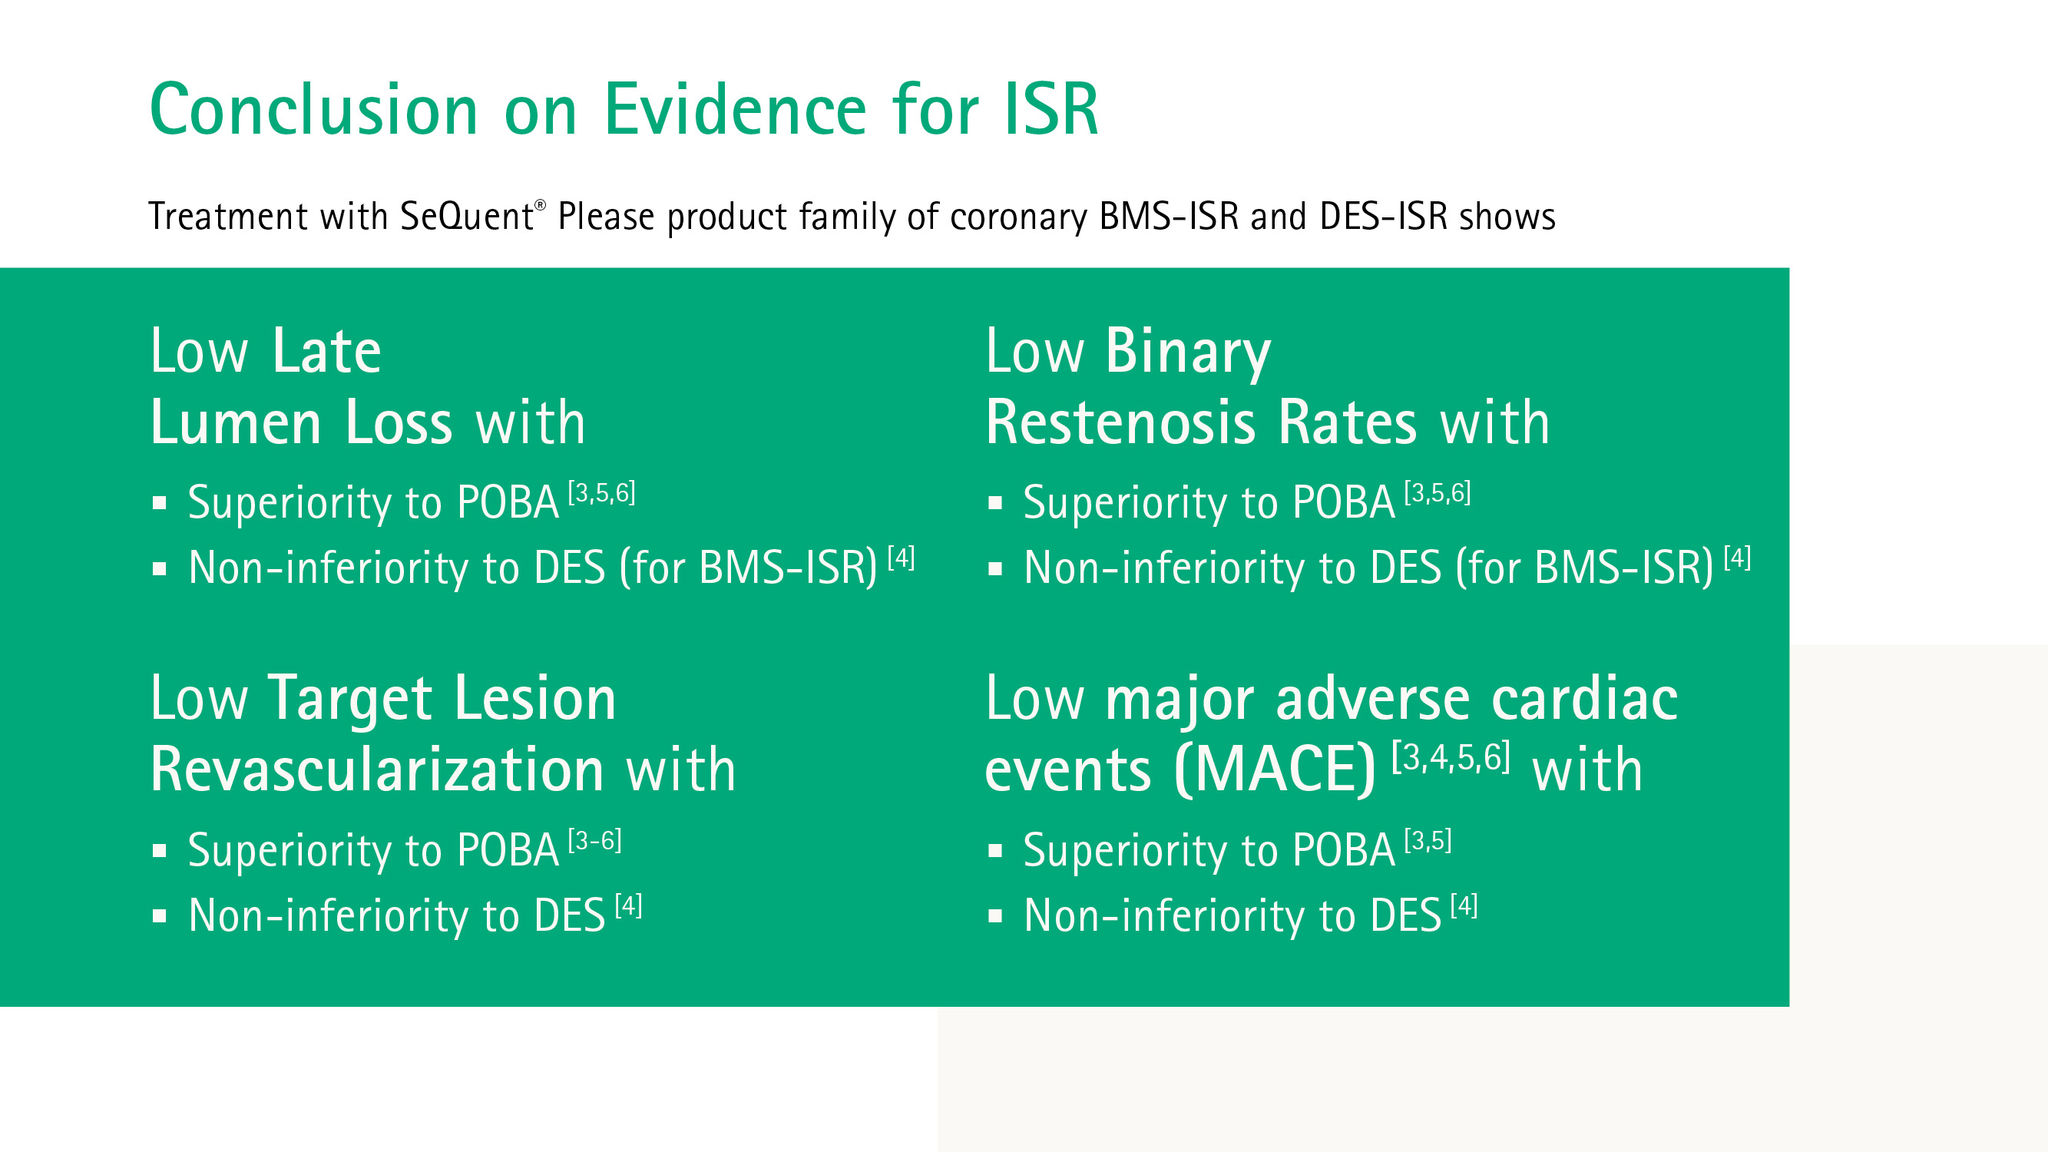 Chart for the conclusion on evidence for ISR